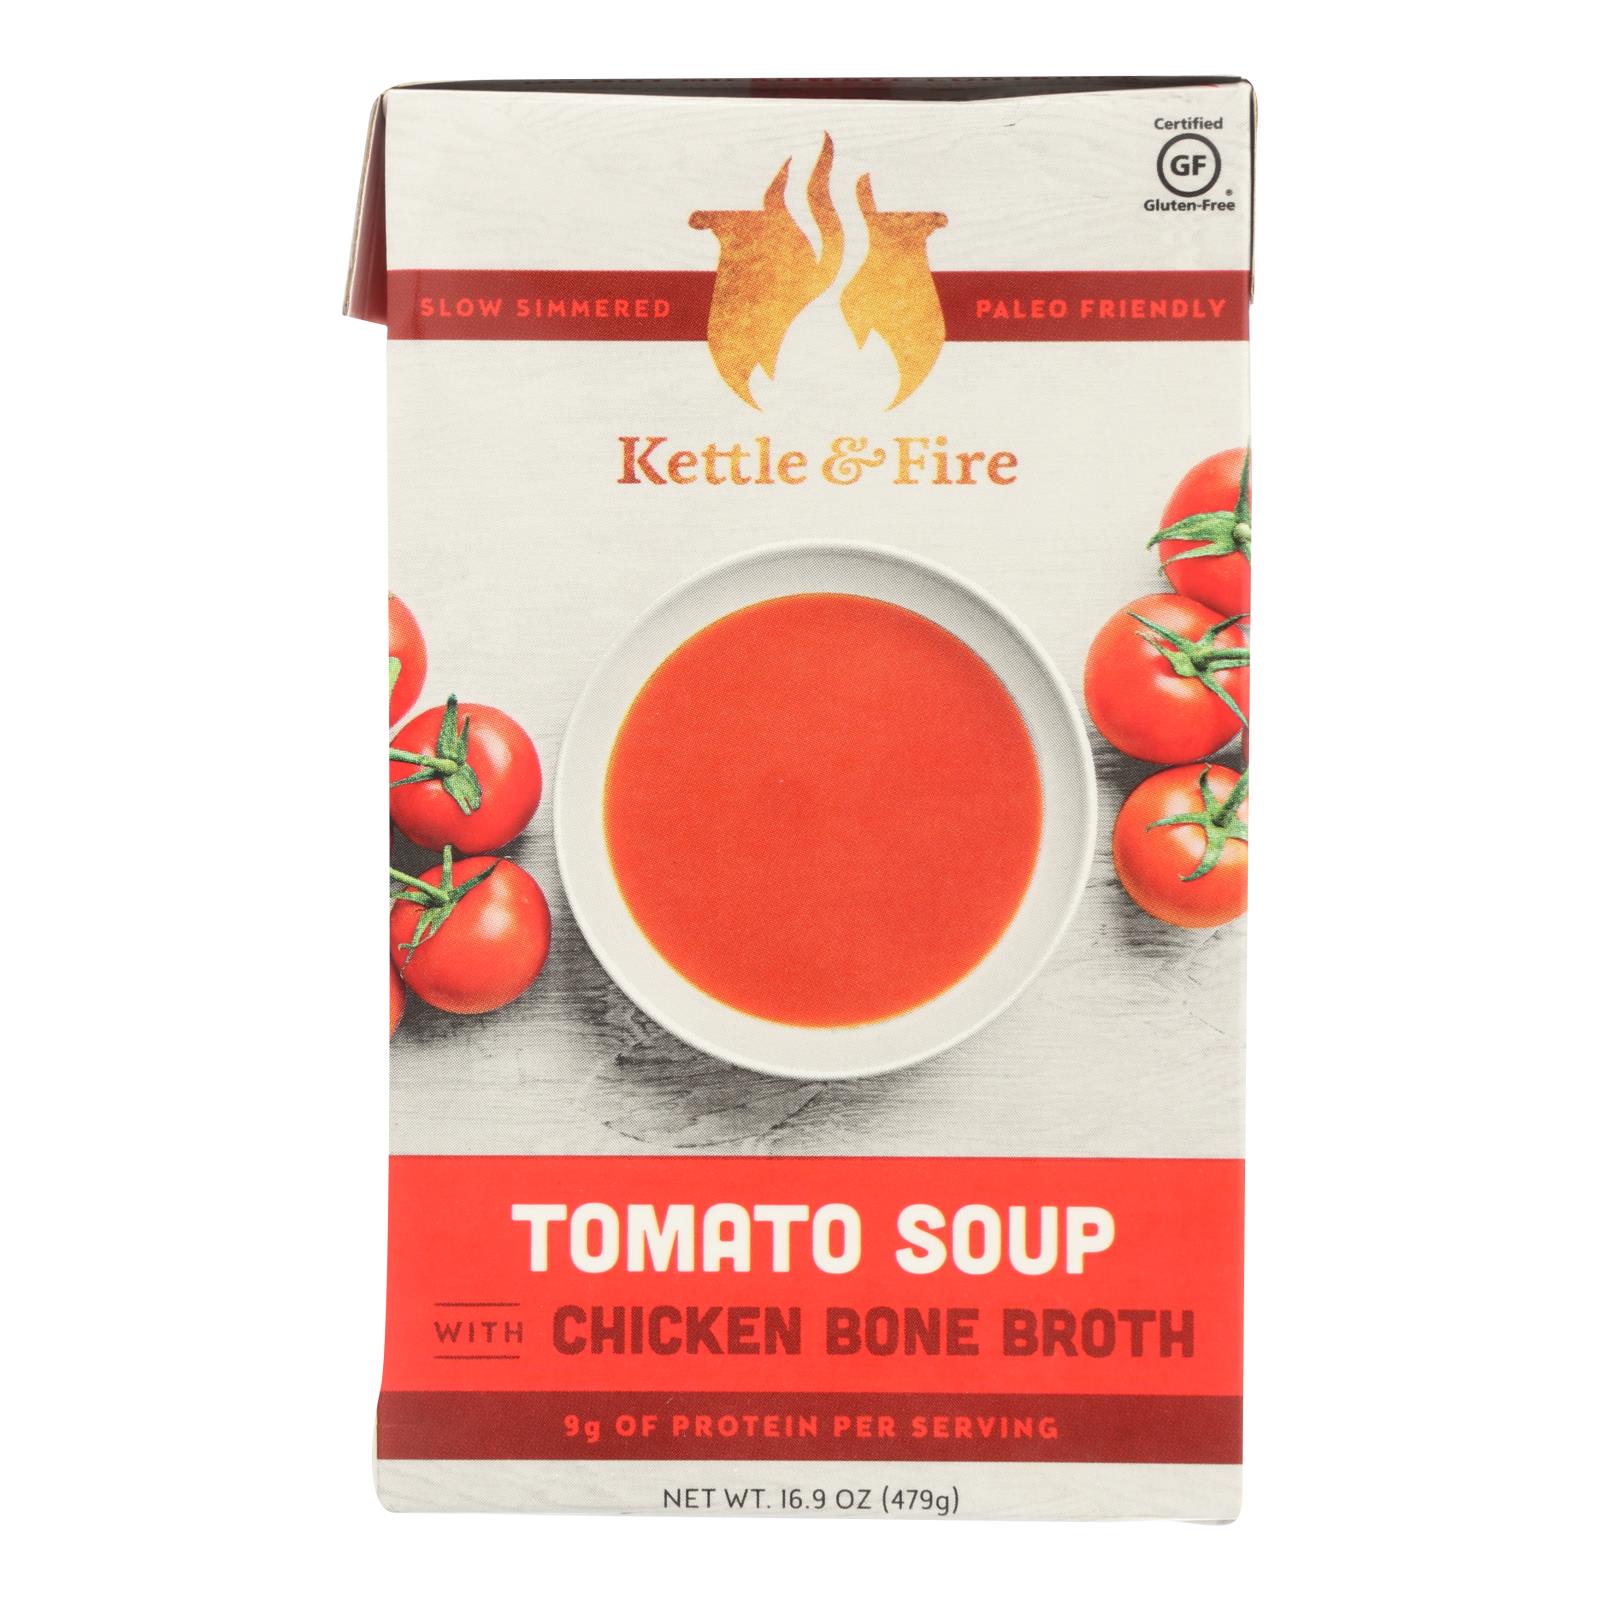 Kettle and Fire Soup - Tomato Soup - 6개 묶음상품 - 16.9 oz.